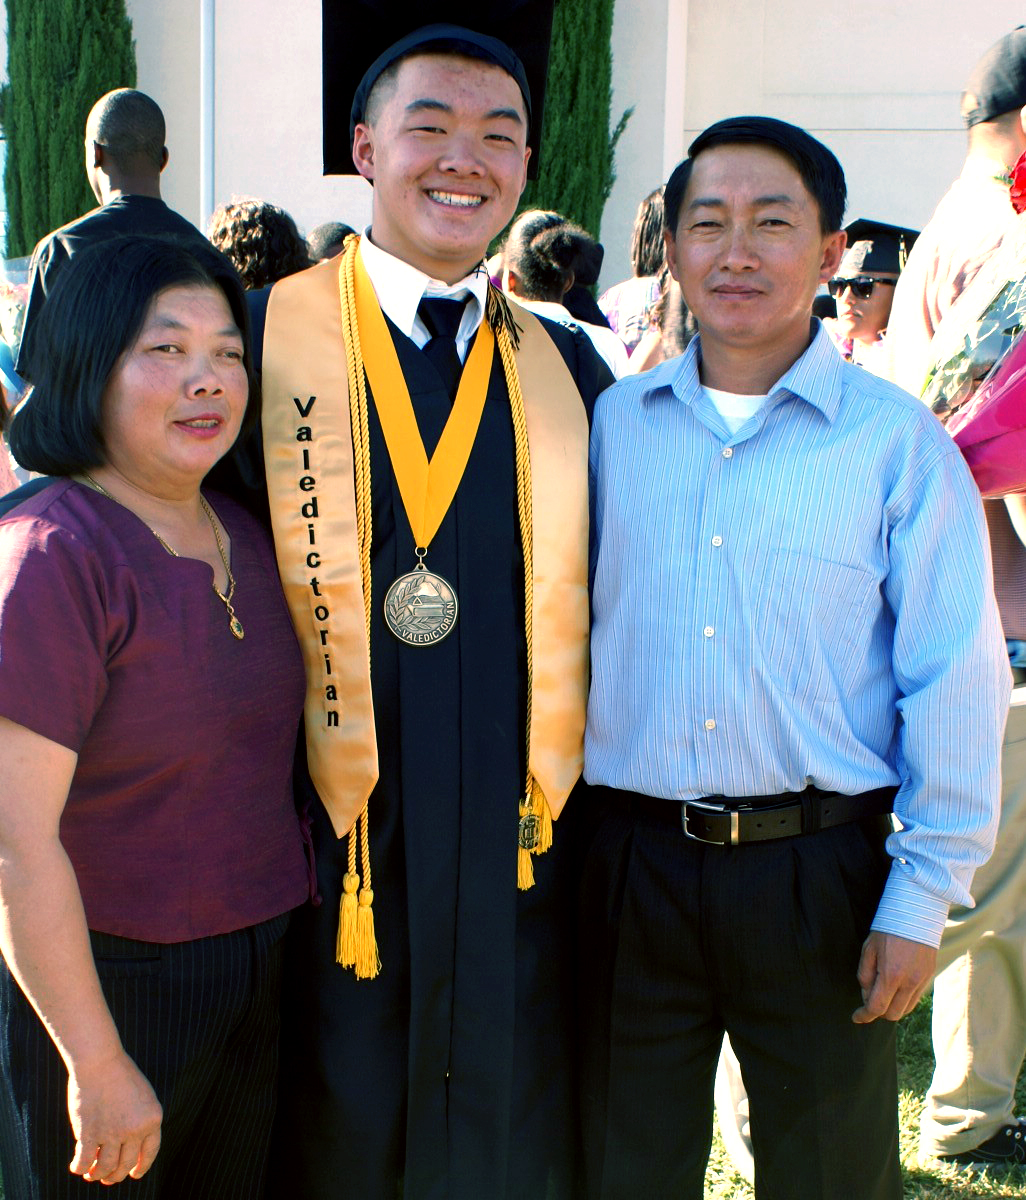 Vang and his proud parents after his high school graduation.